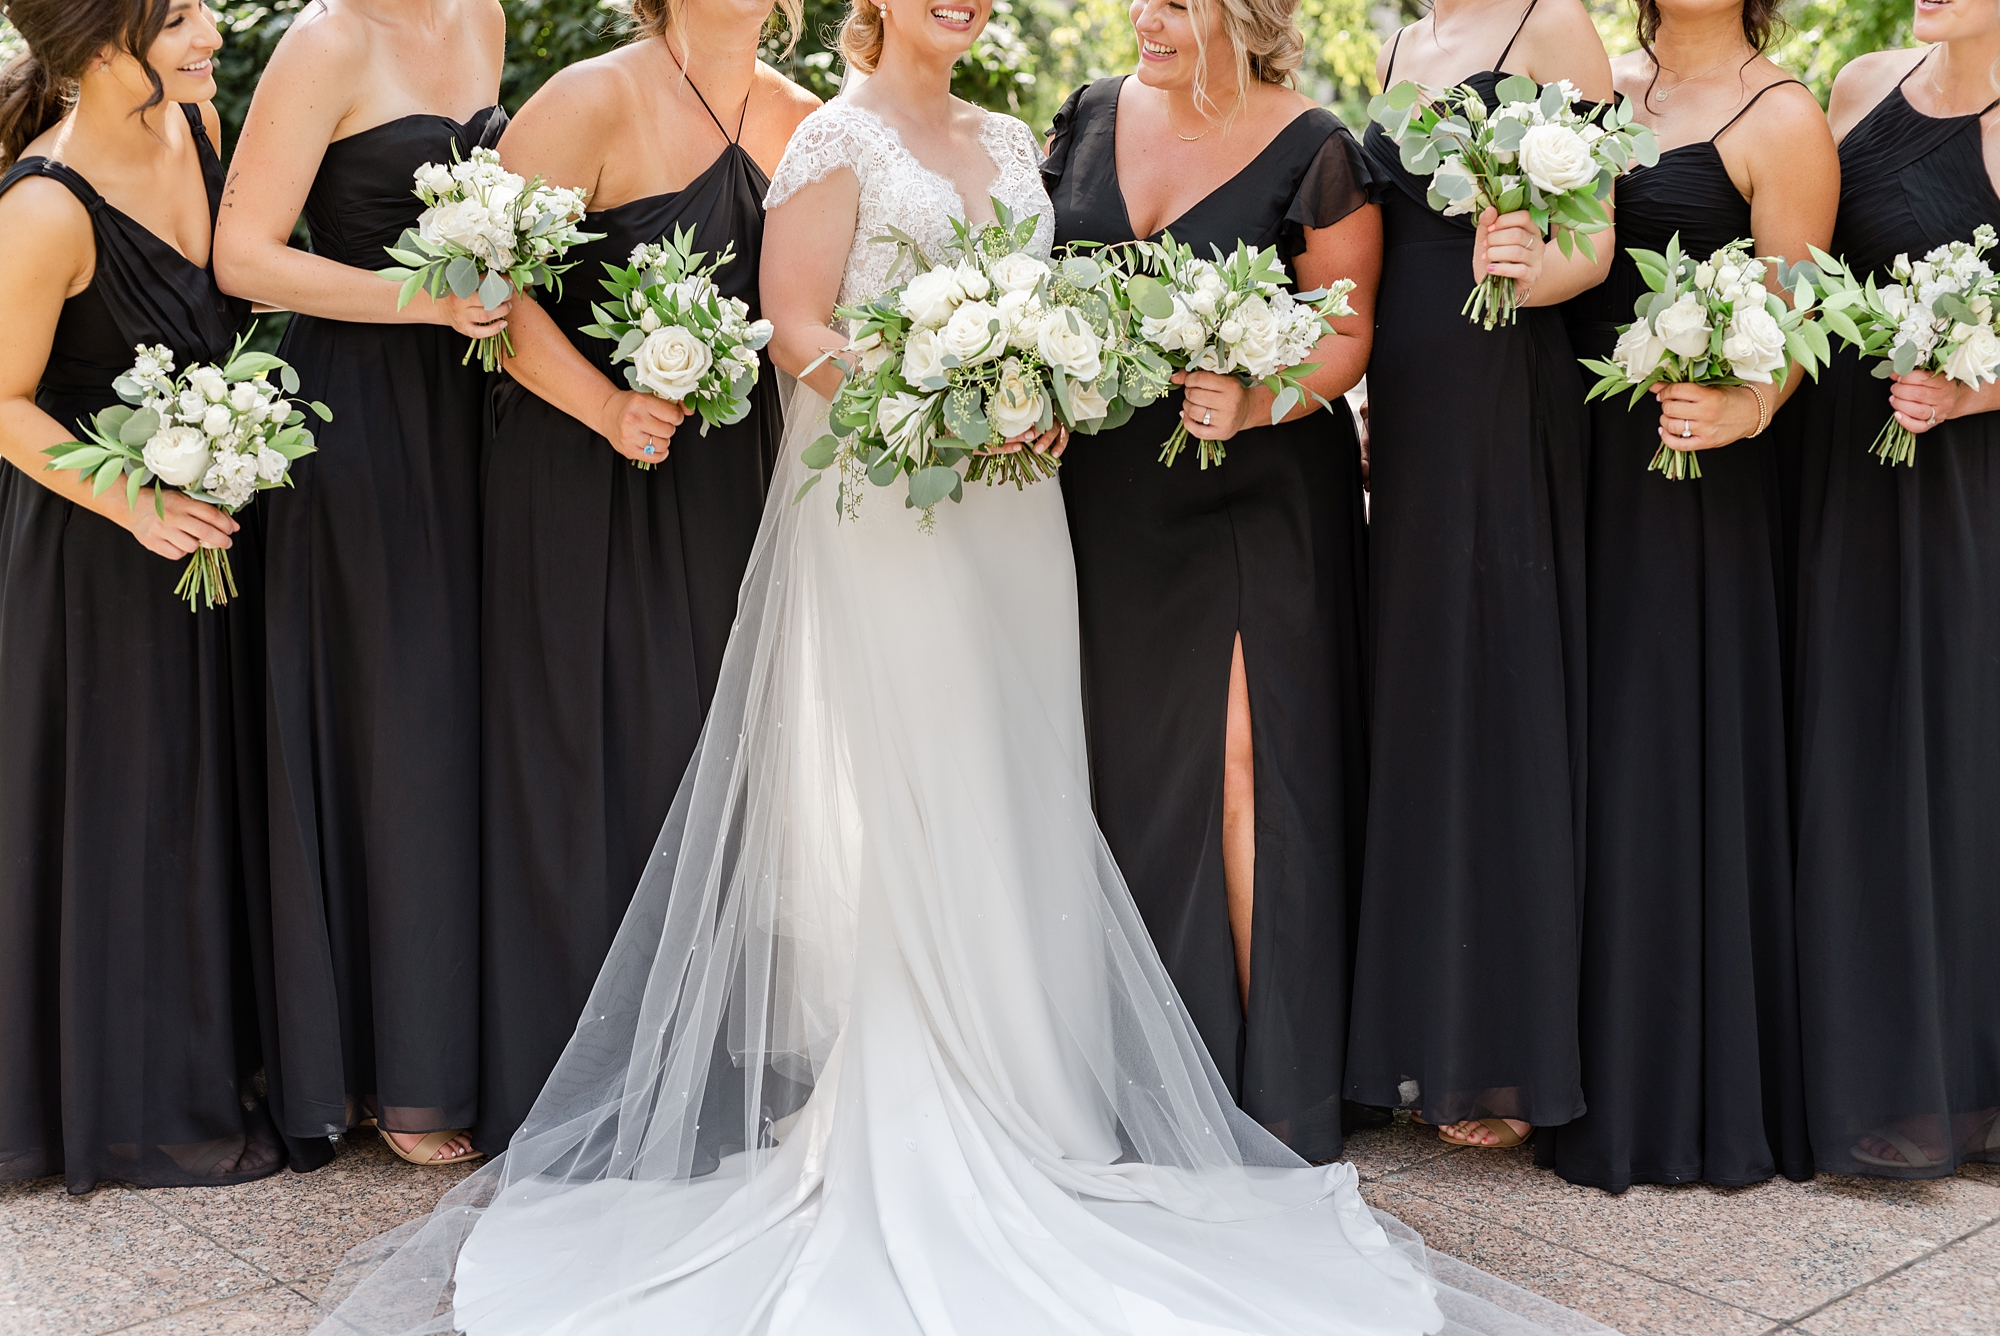 bride and bridesmaids hold bouquets of white flowers